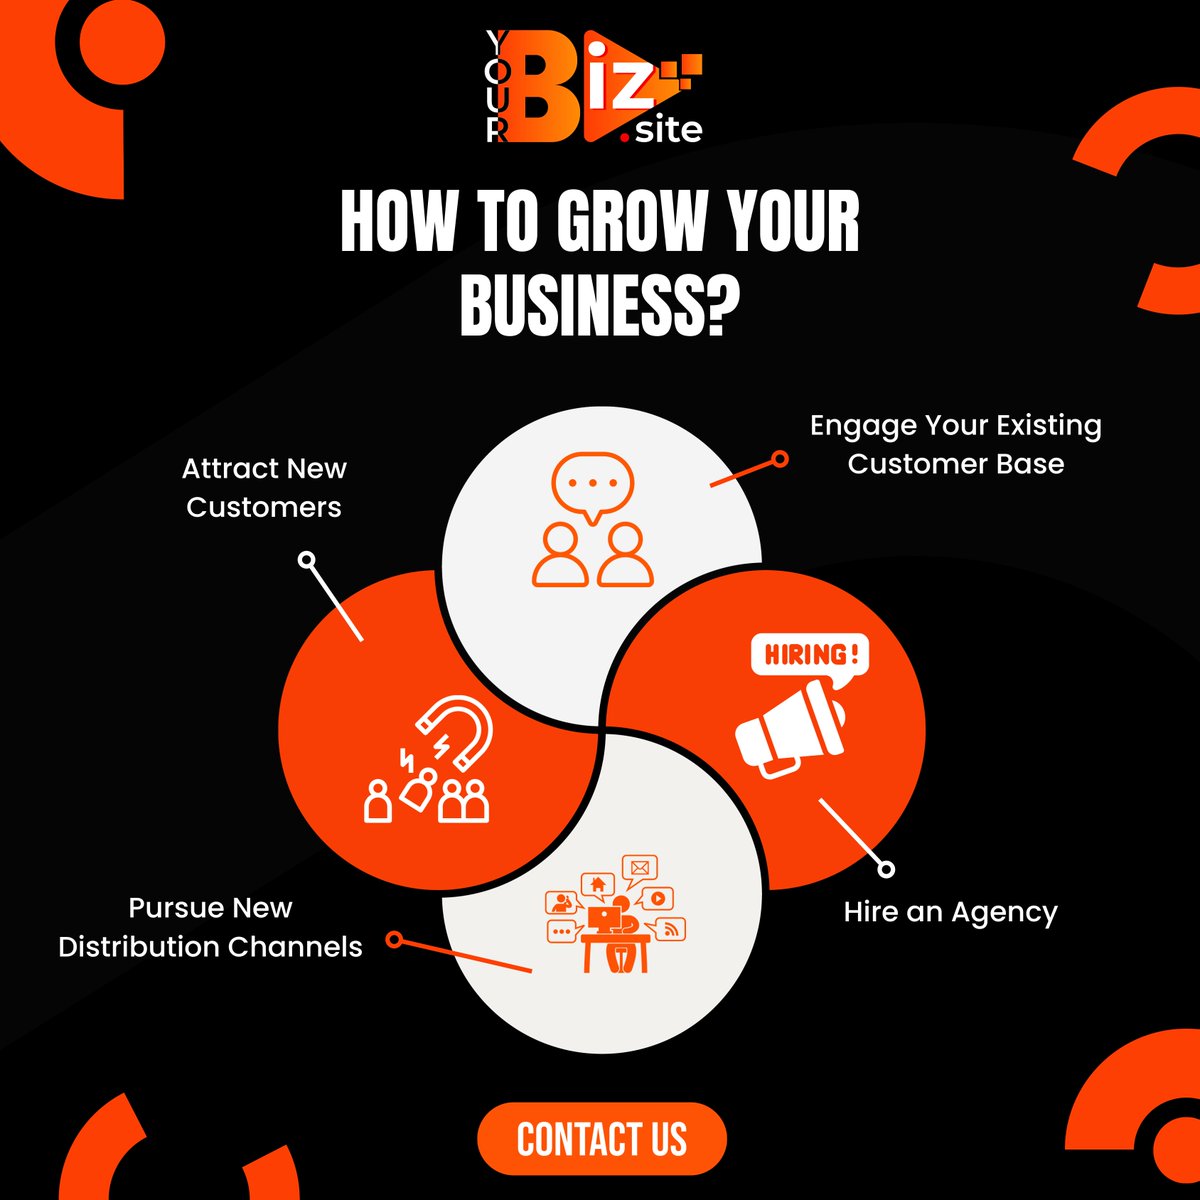 How to Grow Your Business?
1. Attract New Customers.
2. Engage Your Existing Customer Base.
3. Pursue New Distribution Channels.
4. Hire an Agency.

Contact us today! contact@yourbiz.site

#contentideas #contenttips #contenttip #instagramcontent #contentmarketing